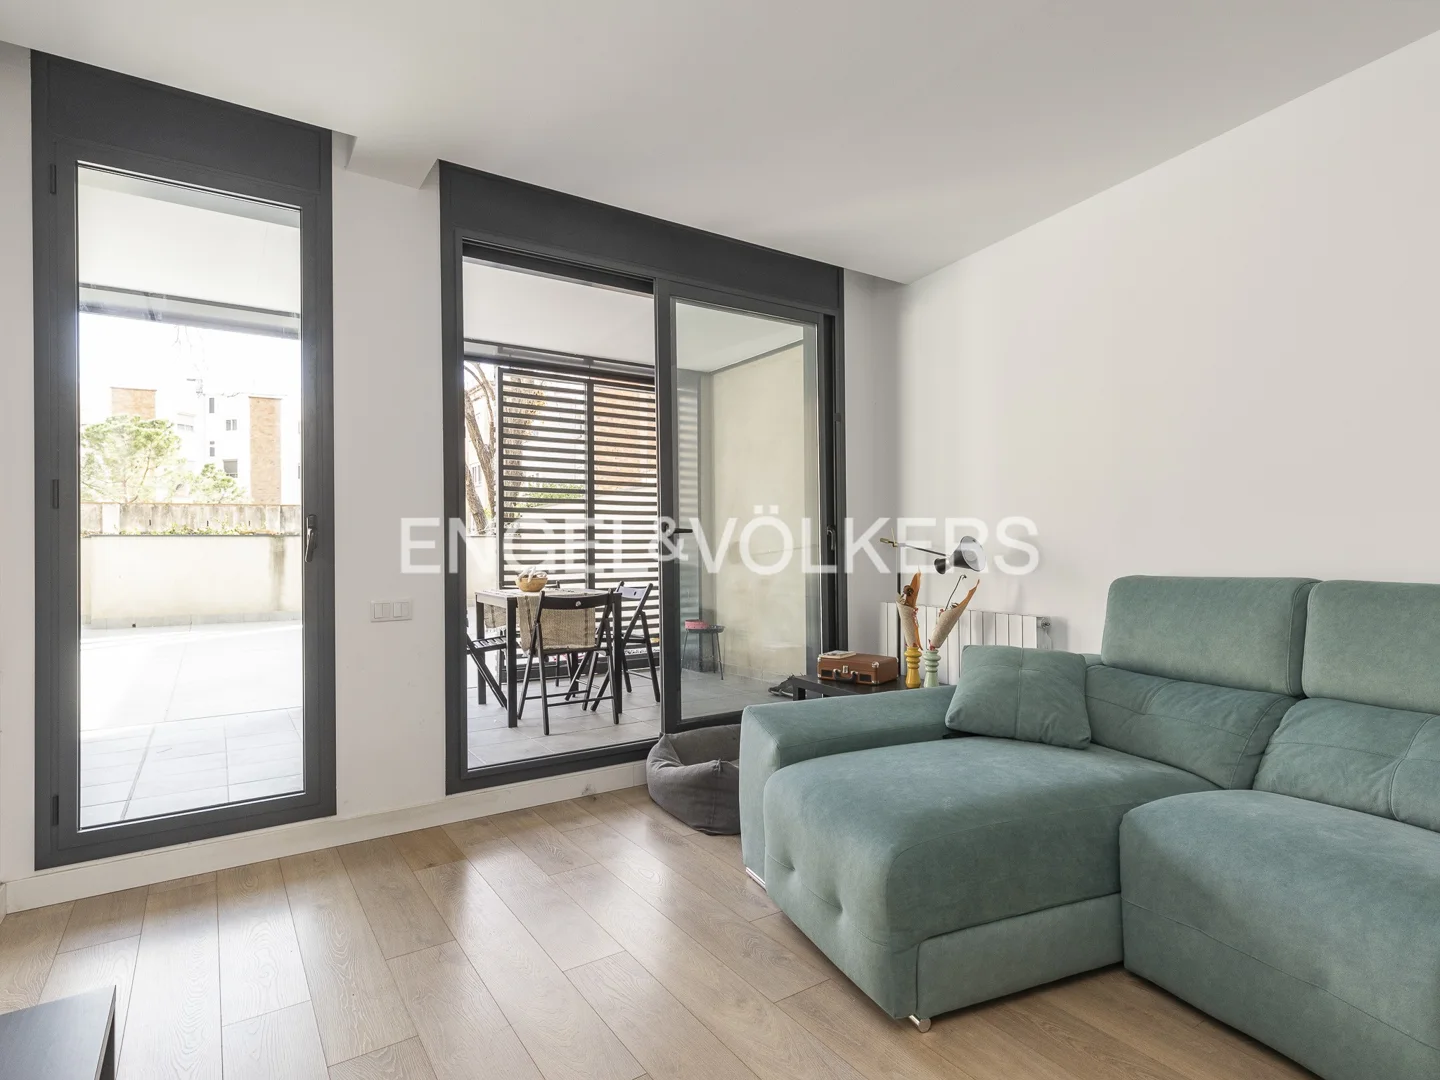 Exclusive furnished flat with terrace in Gracia